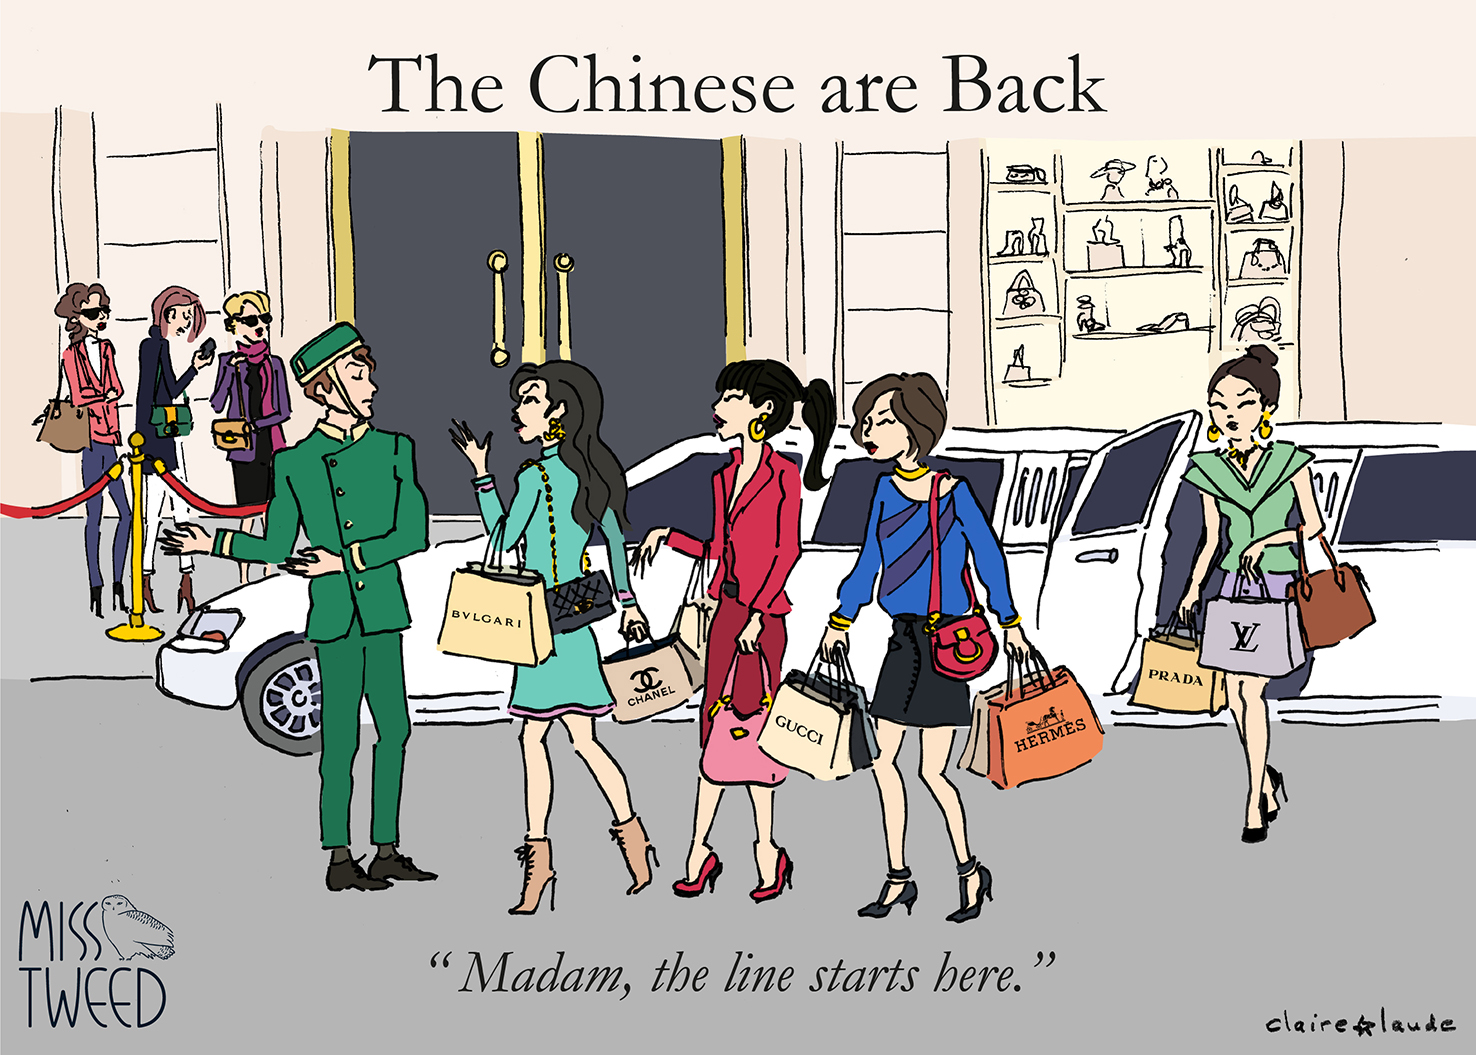 Chinese shoppers